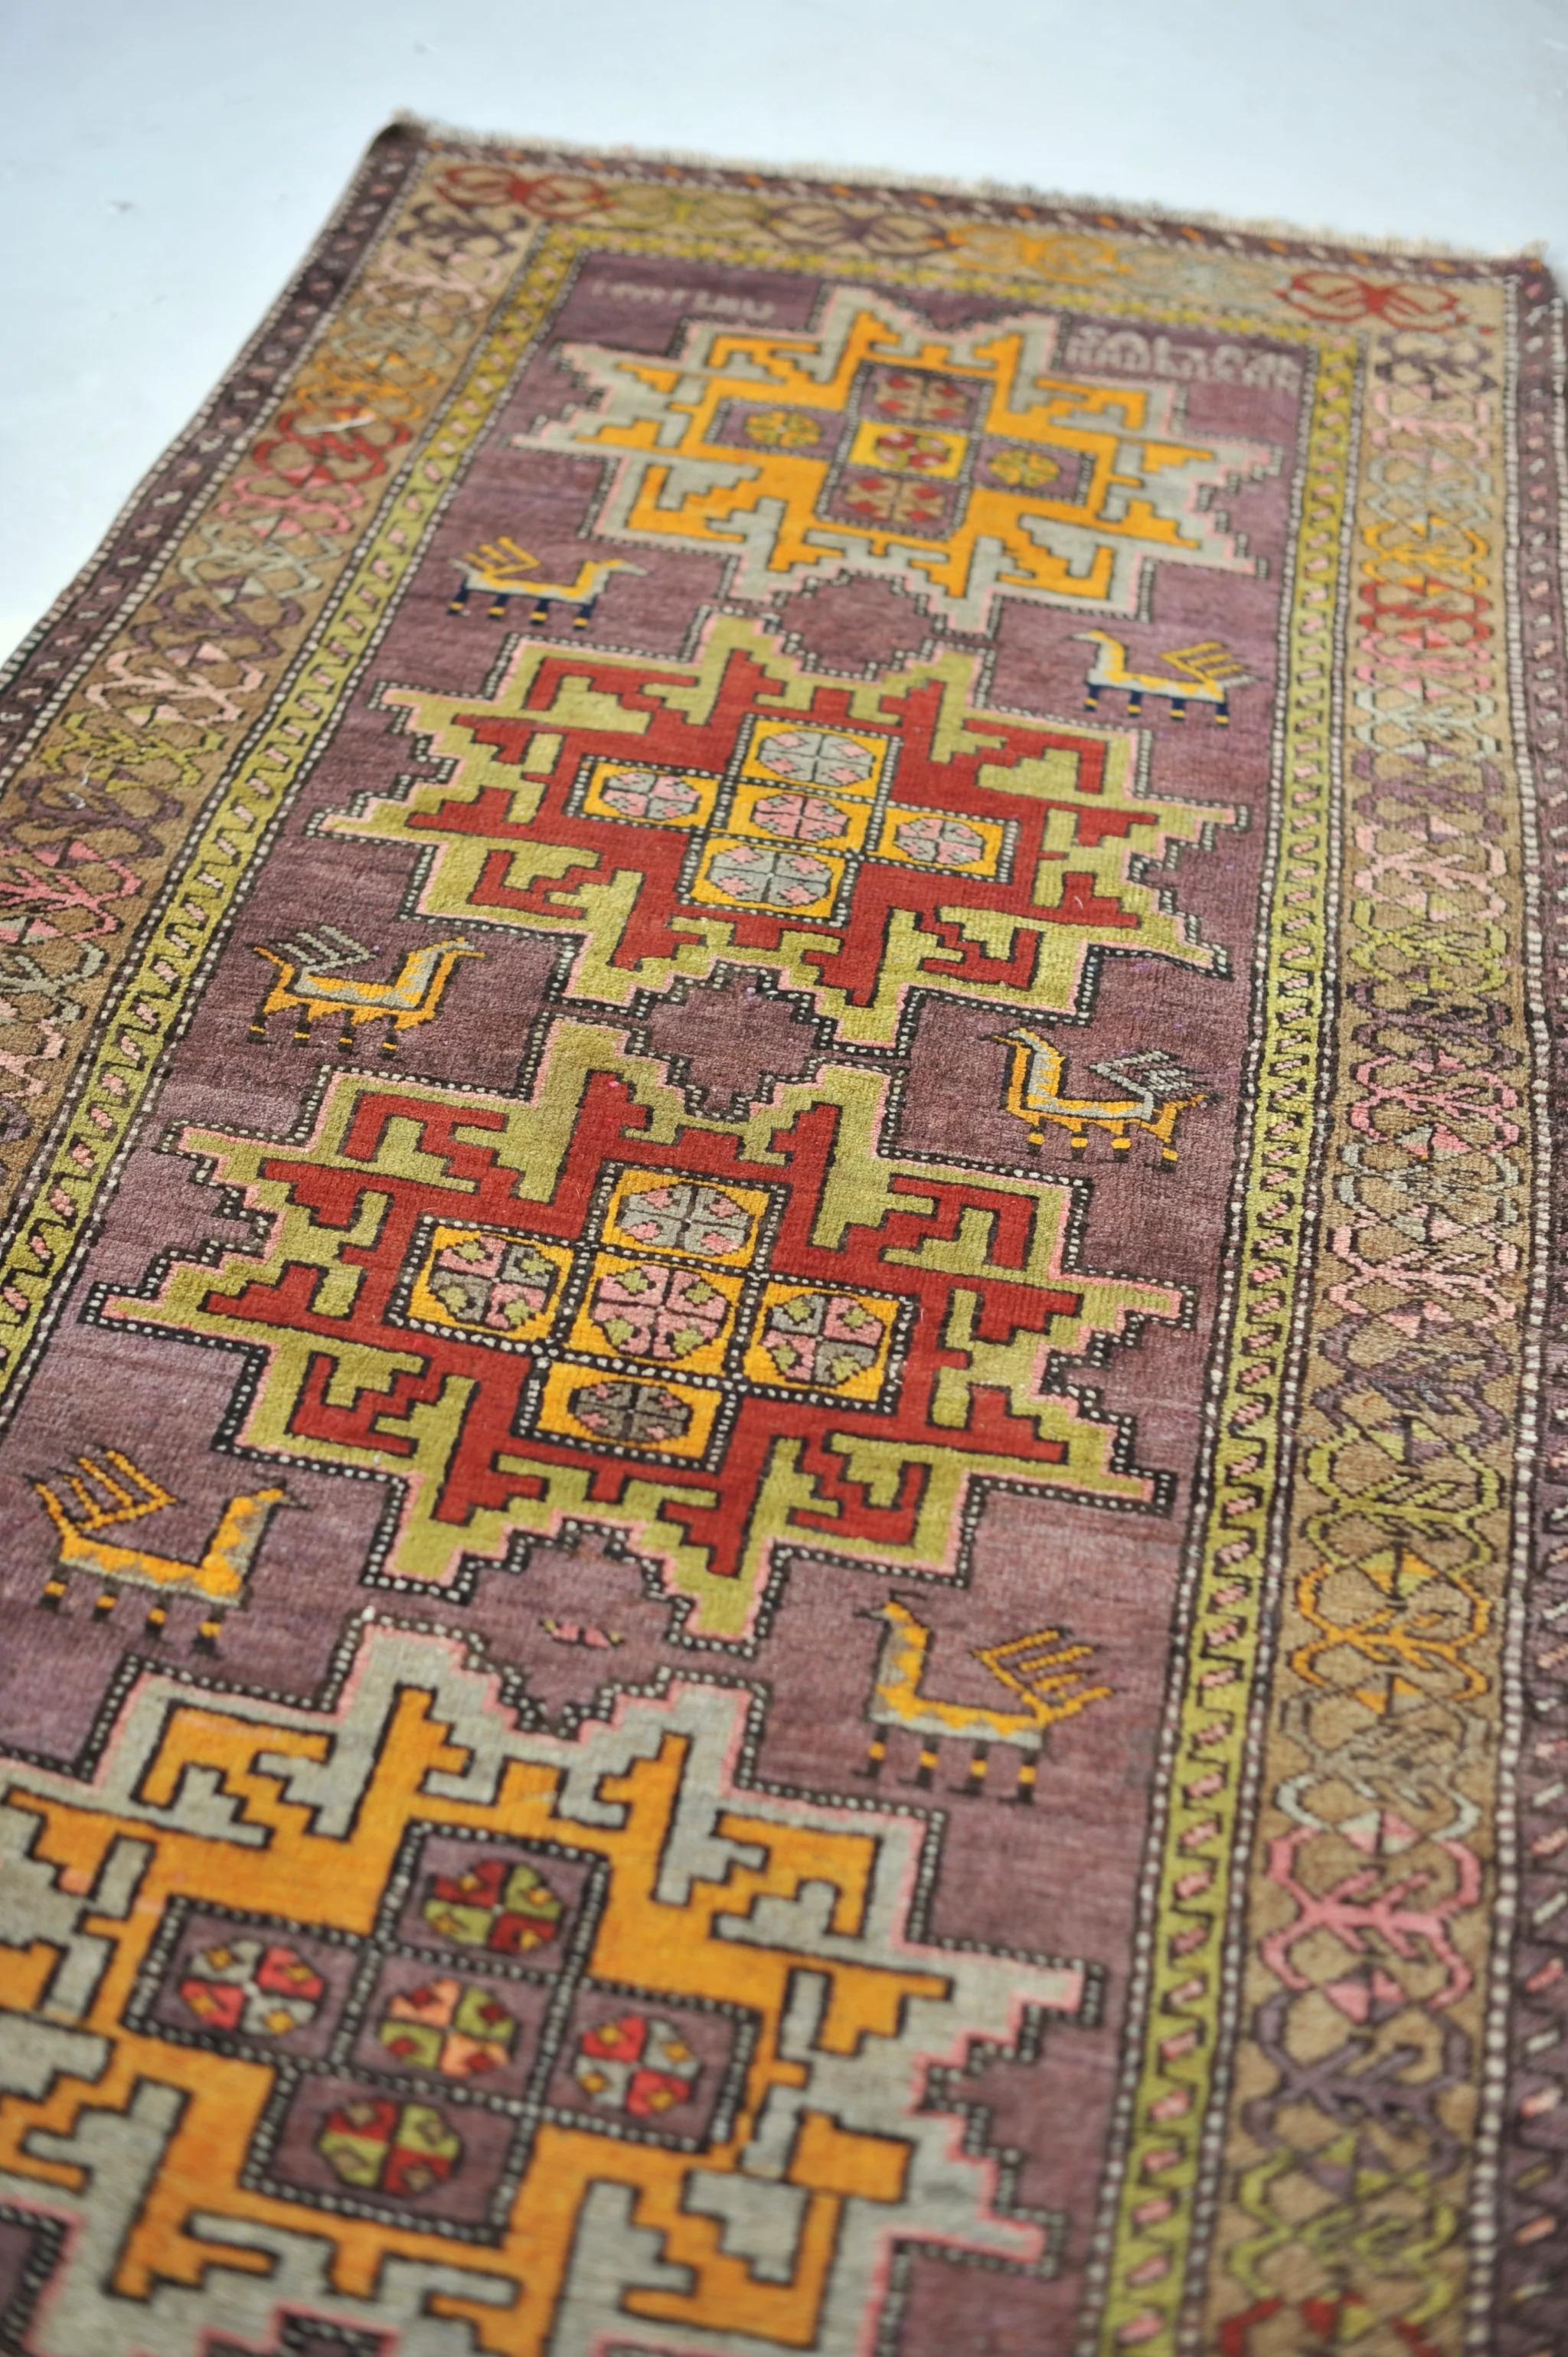 Unusual Plum, Pistachio, Saffron, Akstafa Design with Immortal Peacocks

Size: 3.8 x 7.9
Age: Antique
Pile: Low with age-related patina

This rug is one-of-a-kind, only one in the world, no others are available.

Because of the nature and age of